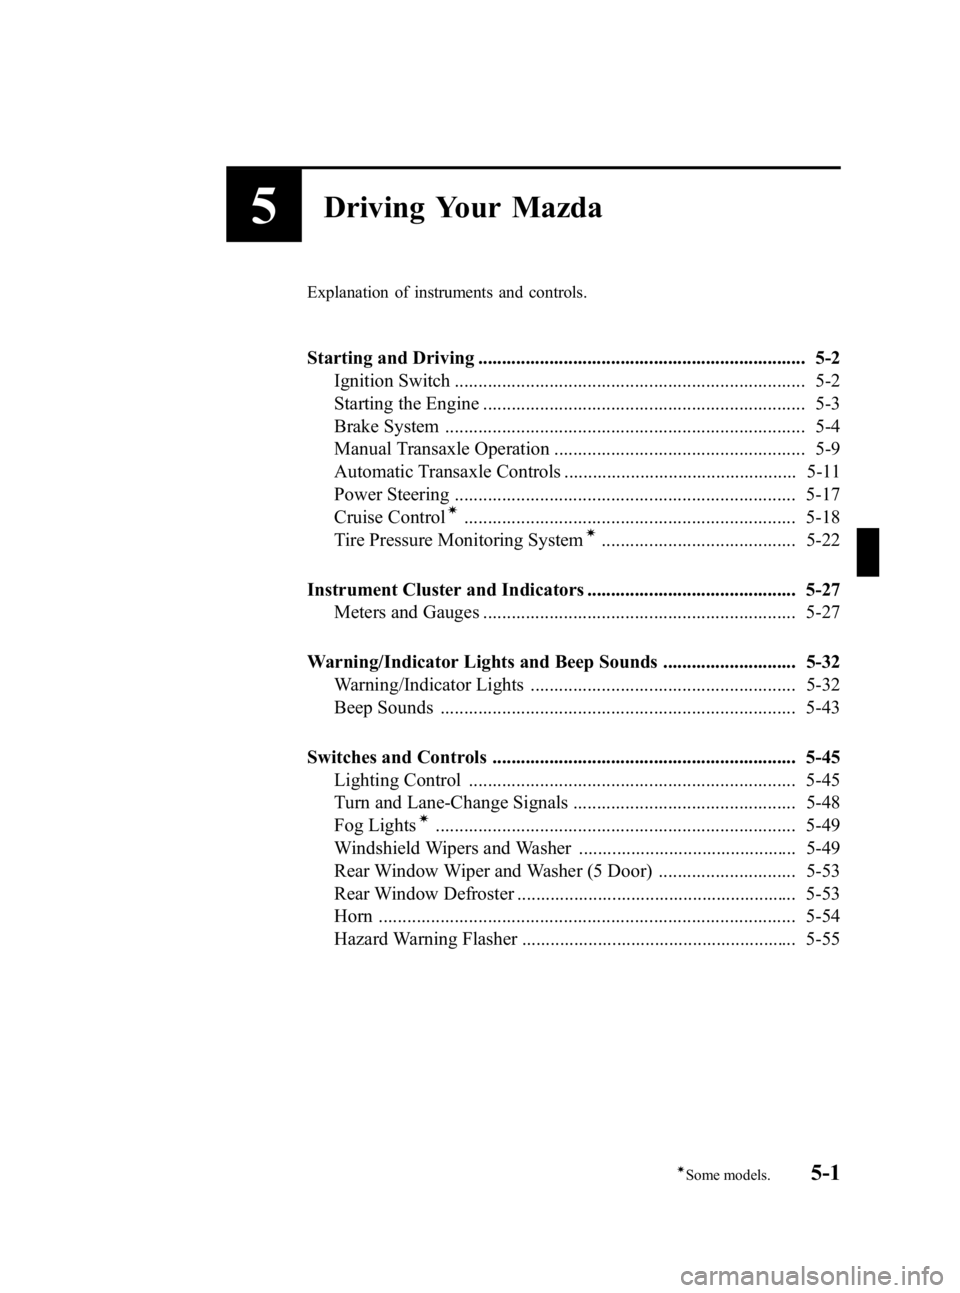 MAZDA MODEL 3 5-DOOR 2005  Owners Manual Black plate (115,1)
5Driving Your Mazda
Explanation of instruments and controls.
Starting and Driving ..................................................................... 5-2Ignition Switch .........